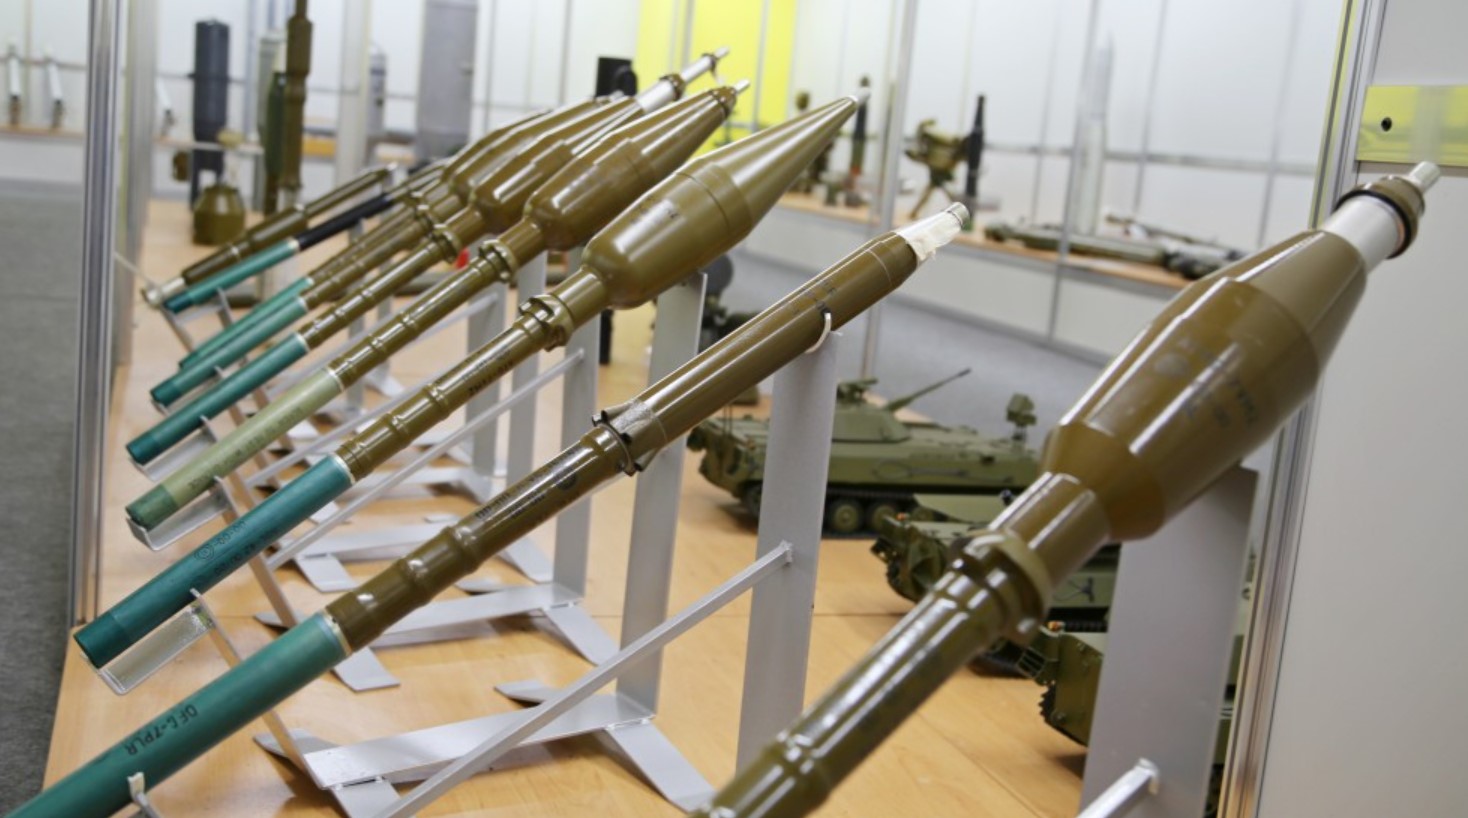 Minister of Defense of Bulgaria: The majority of Bulgarian weapons go to Ukraine